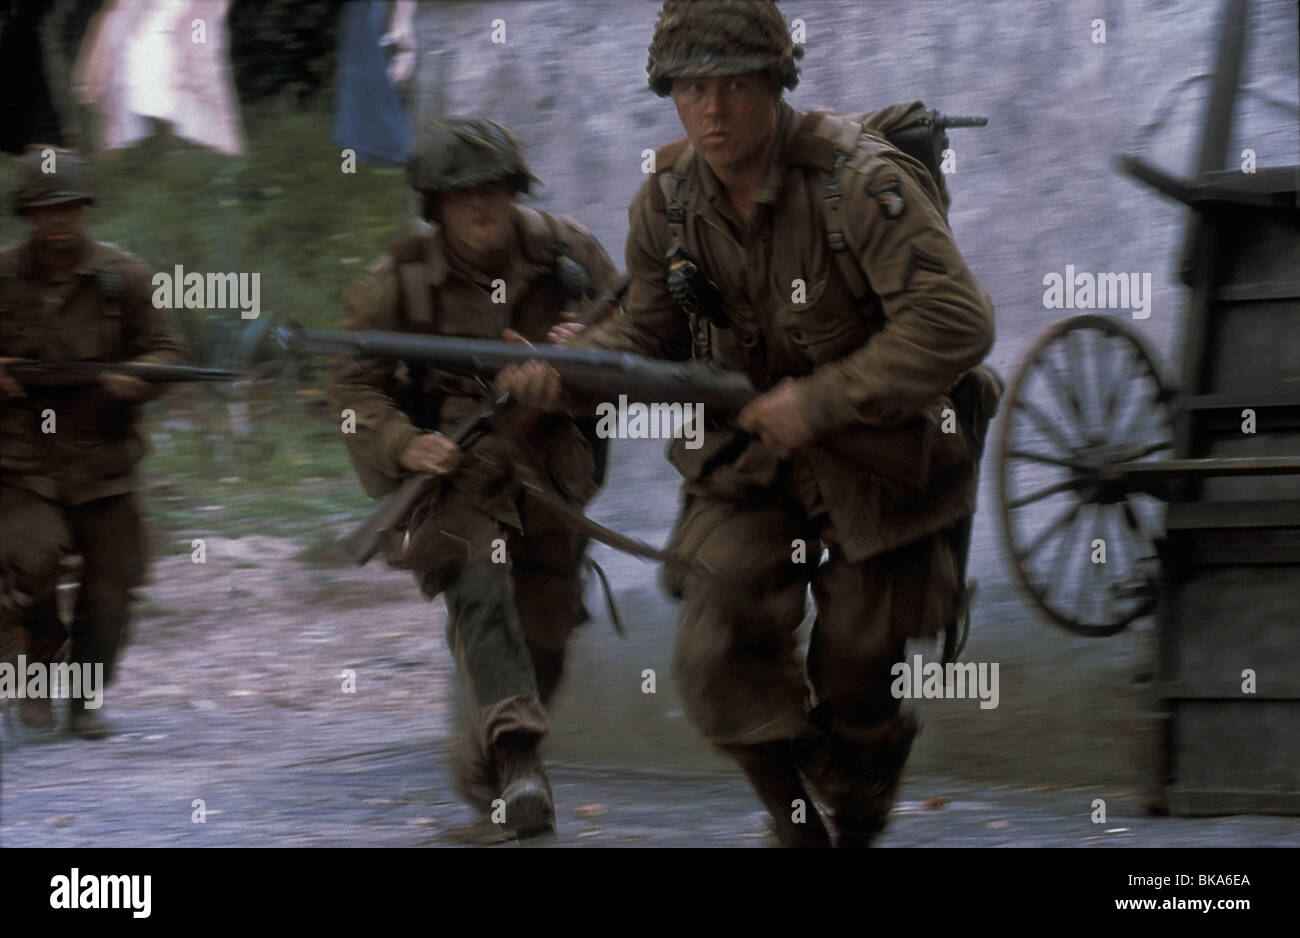 BAND OF BROTHERS (TV) MICHAEL CIDLITZ BDBS 00 Banque D'Images